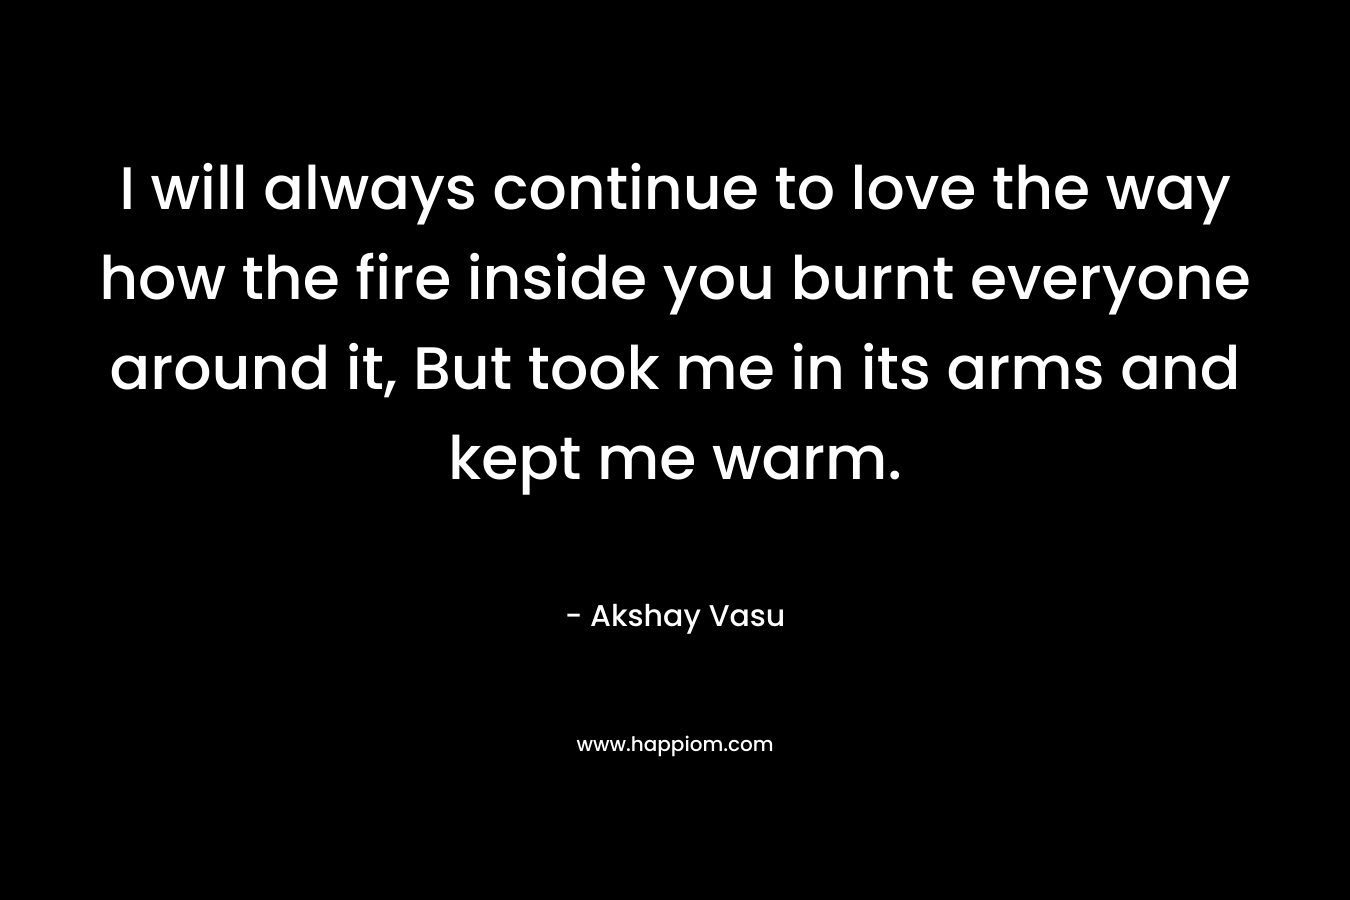 I will always continue to love the way how the fire inside you burnt everyone around it, But took me in its arms and kept me warm. – Akshay Vasu